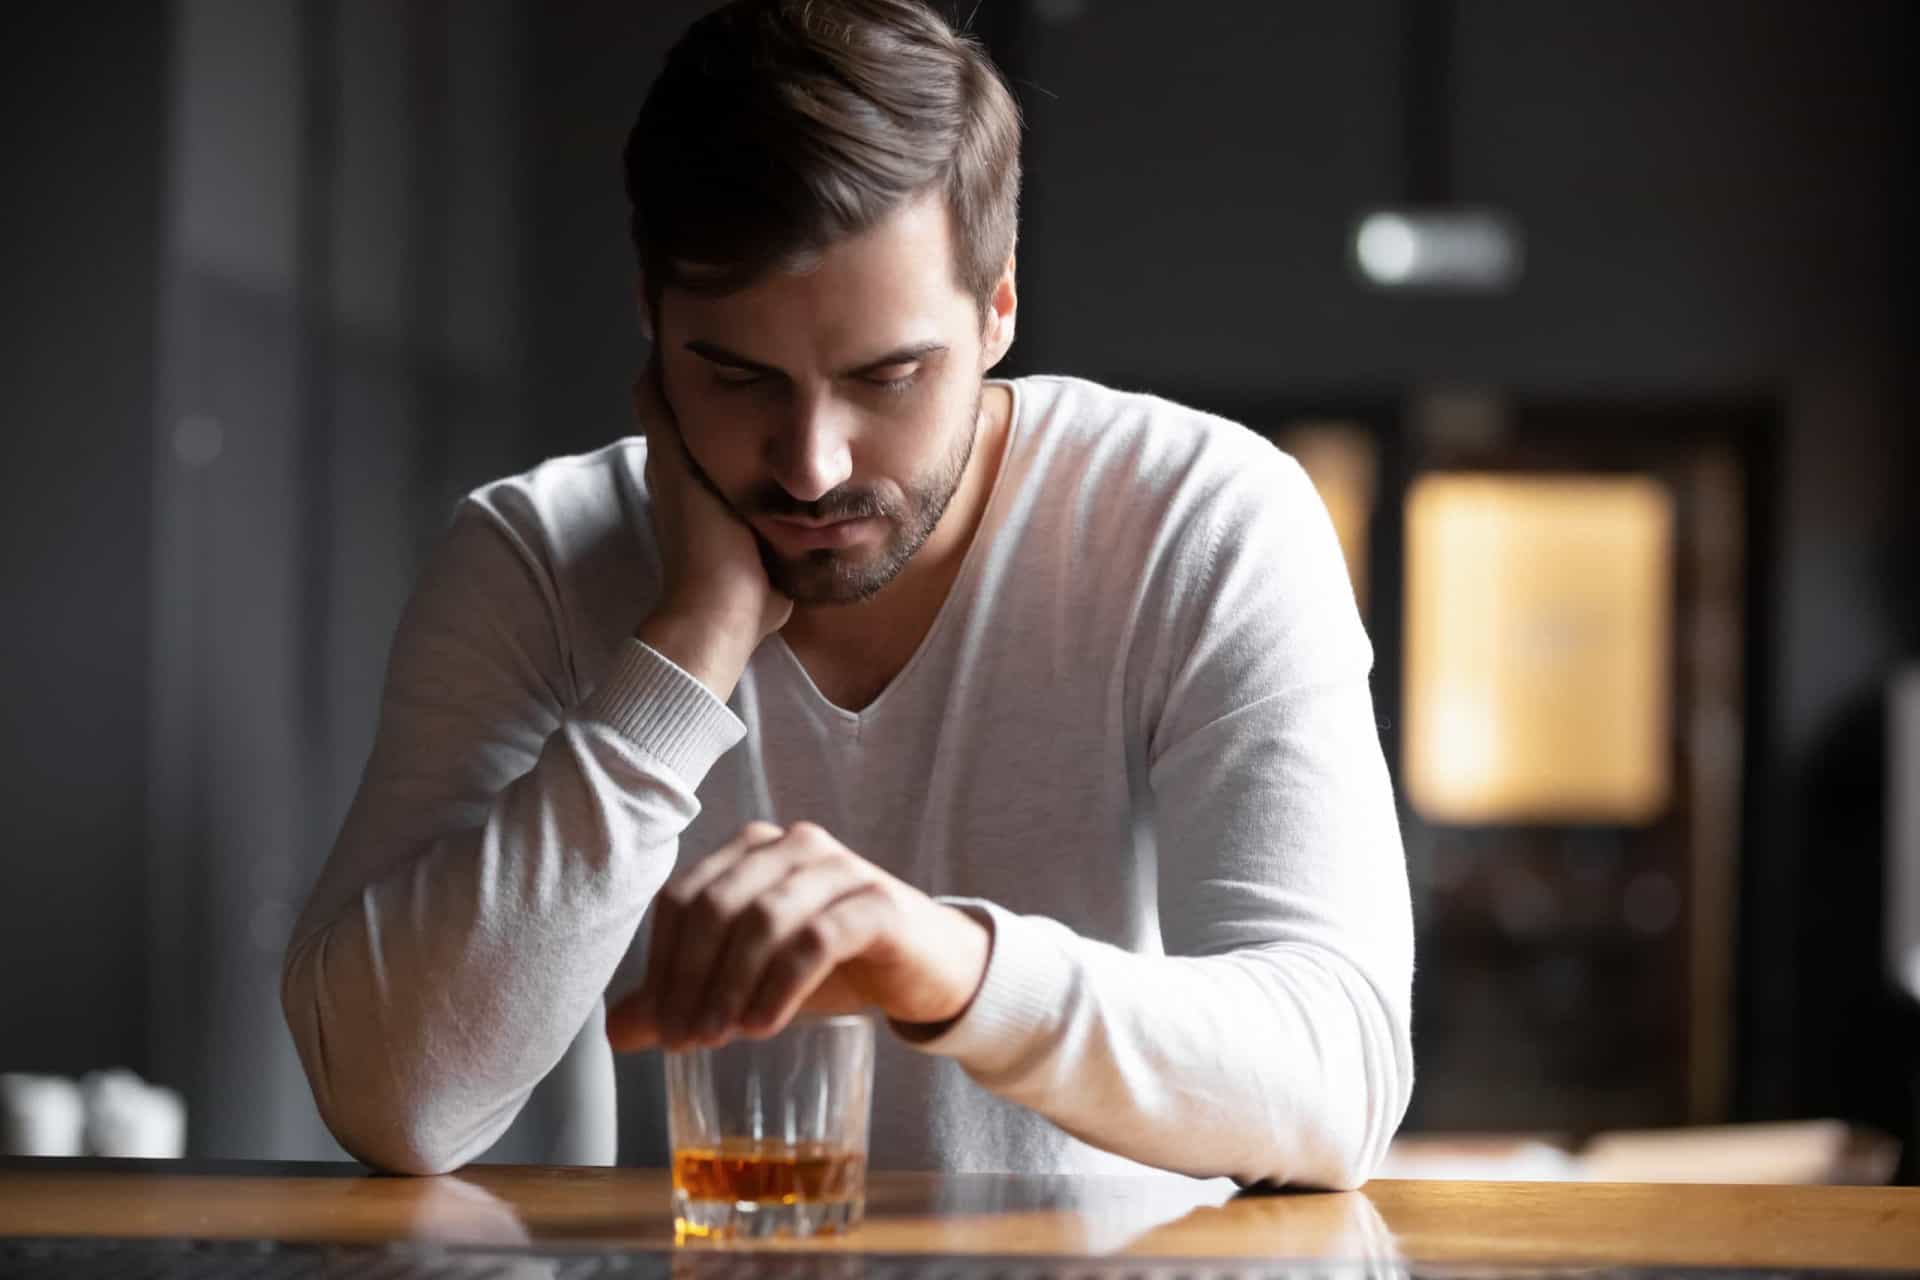 <p>A partner’s addiction can cause a significant effect on the family and couple's overall happiness. Counseling and therapy can be enormously helpful as it helps both partners deal with the issues that inevitably arise.</p><p><a href="https://www.msn.com/en-us/community/channel/vid-7xx8mnucu55yw63we9va2gwr7uihbxwc68fxqp25x6tg4ftibpra?cvid=94631541bc0f4f89bfd59158d696ad7e">Follow us and access great exclusive content everyday</a></p>